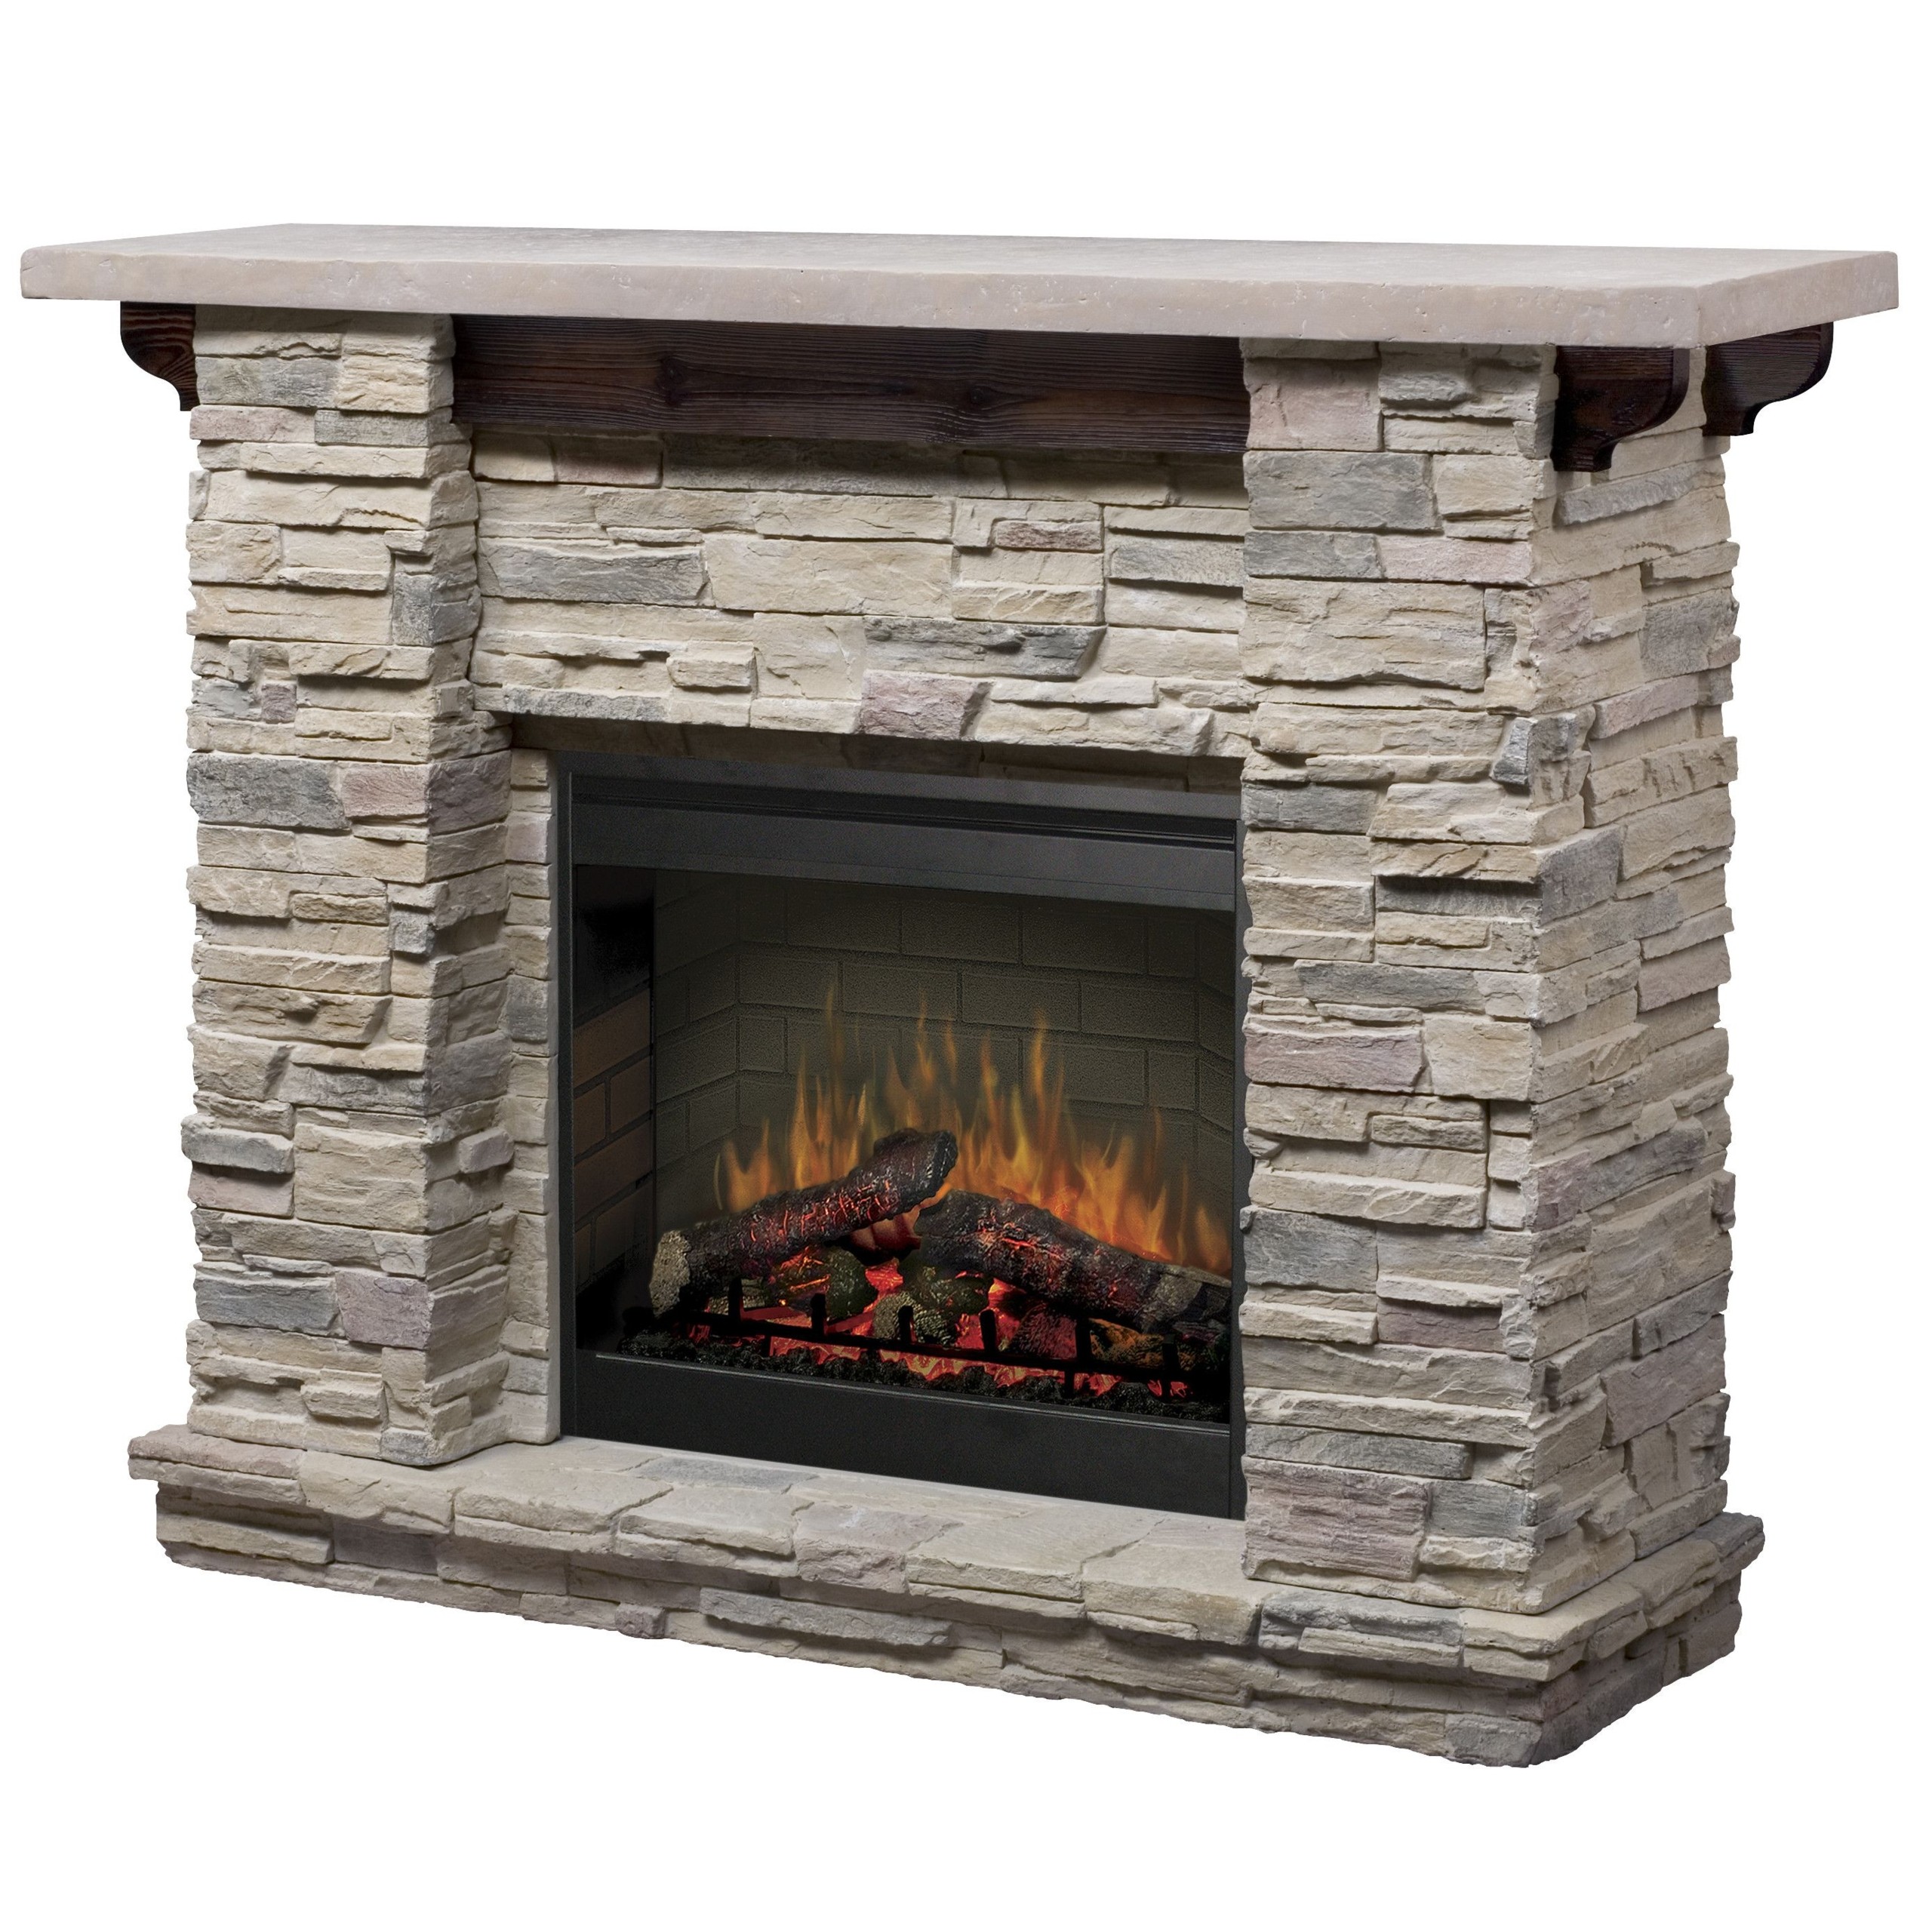 How to make an electric fireplace